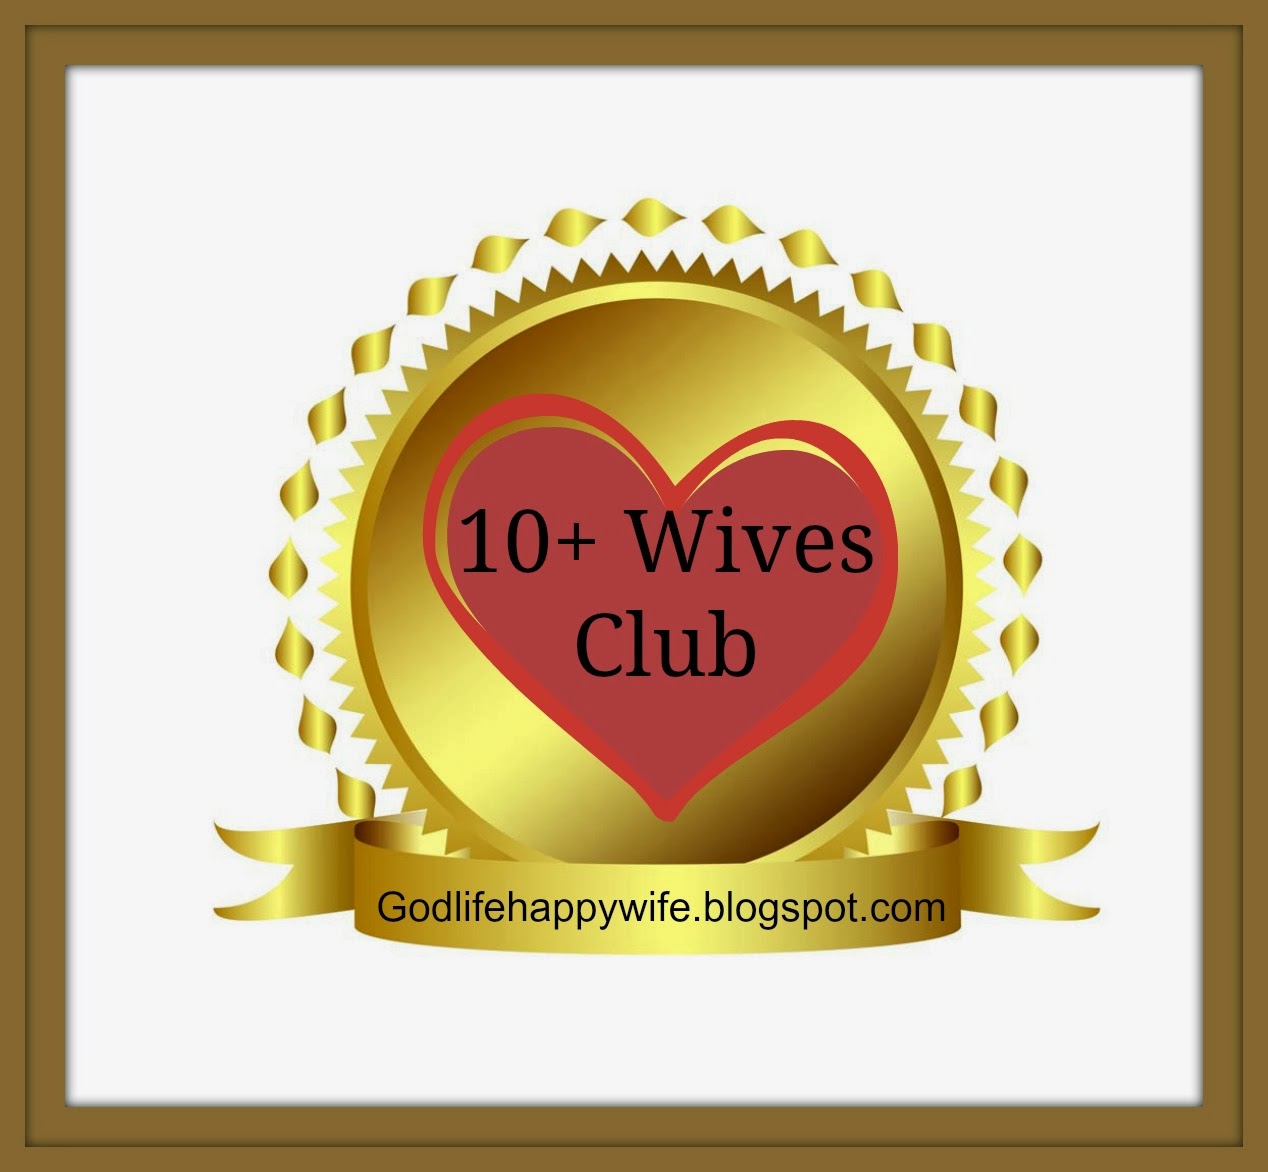 Are you a 10+ Wife?